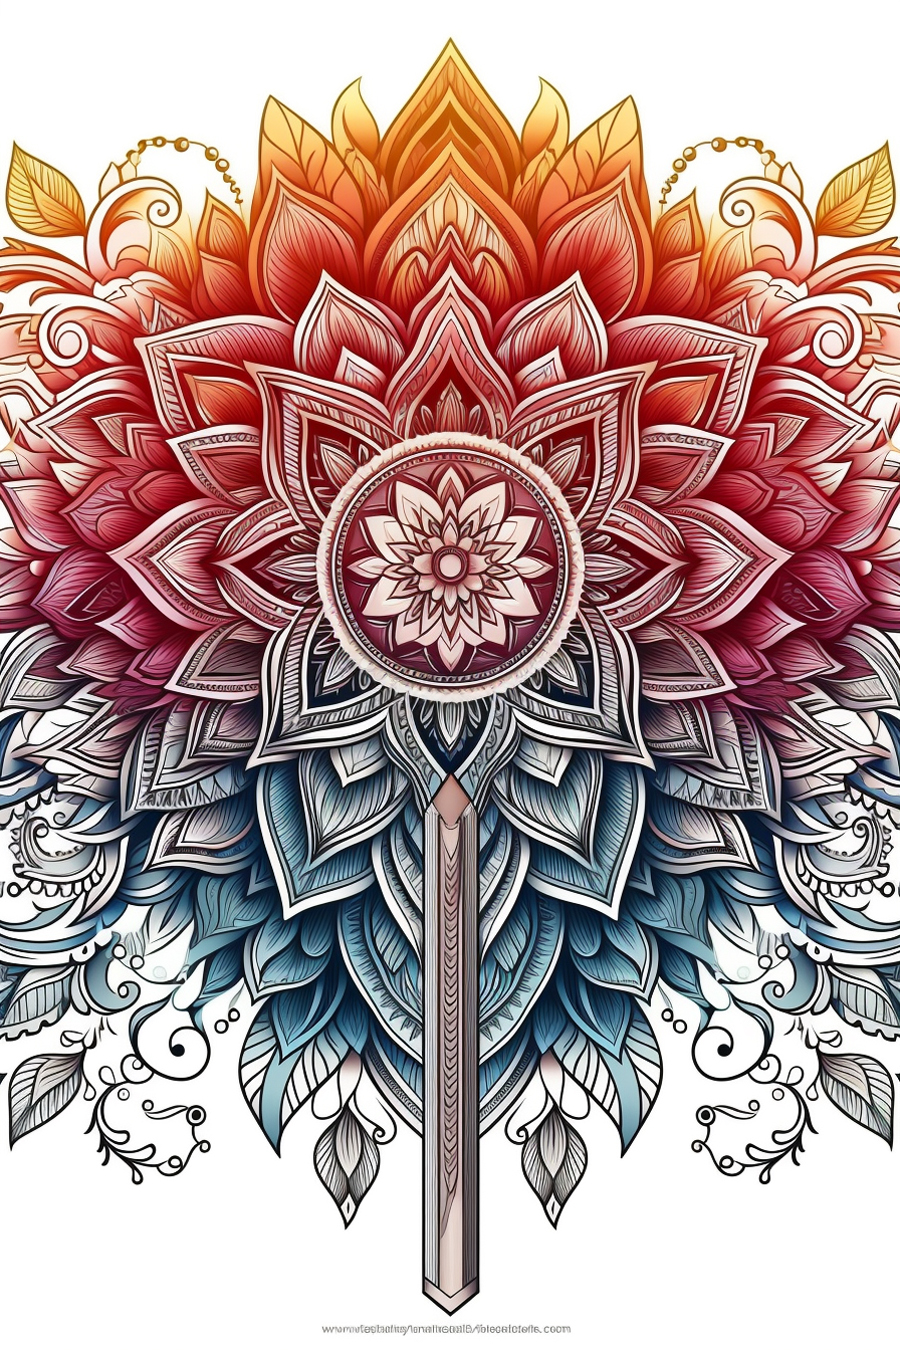 A mandala with a key in the center.